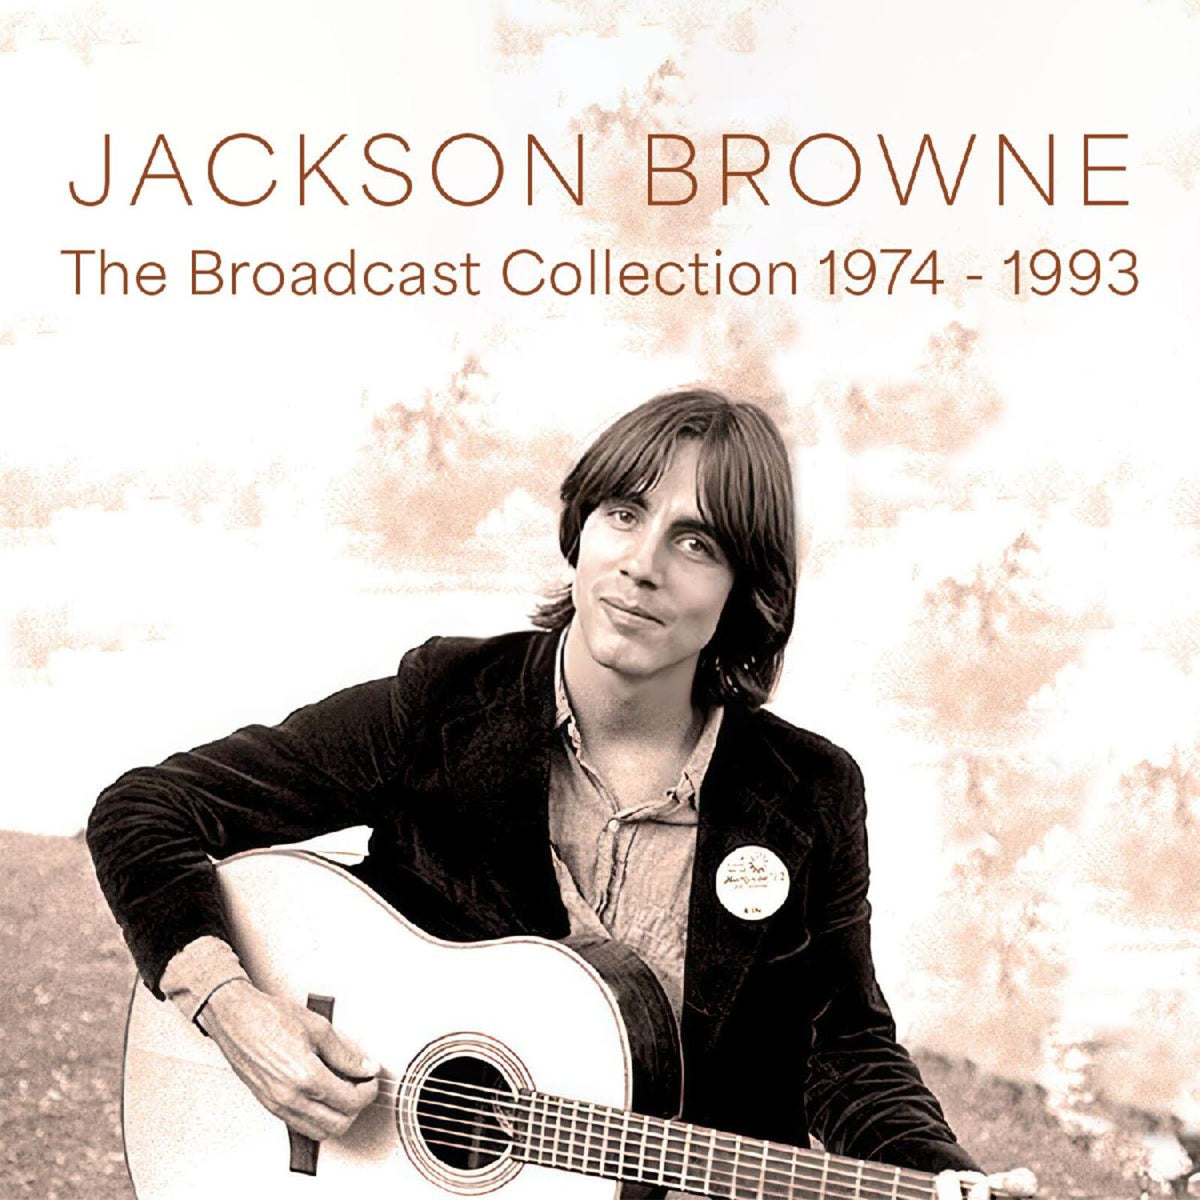 Jackson Browne - Broadcast Collection, 1974-1993 - FMGZ184CD